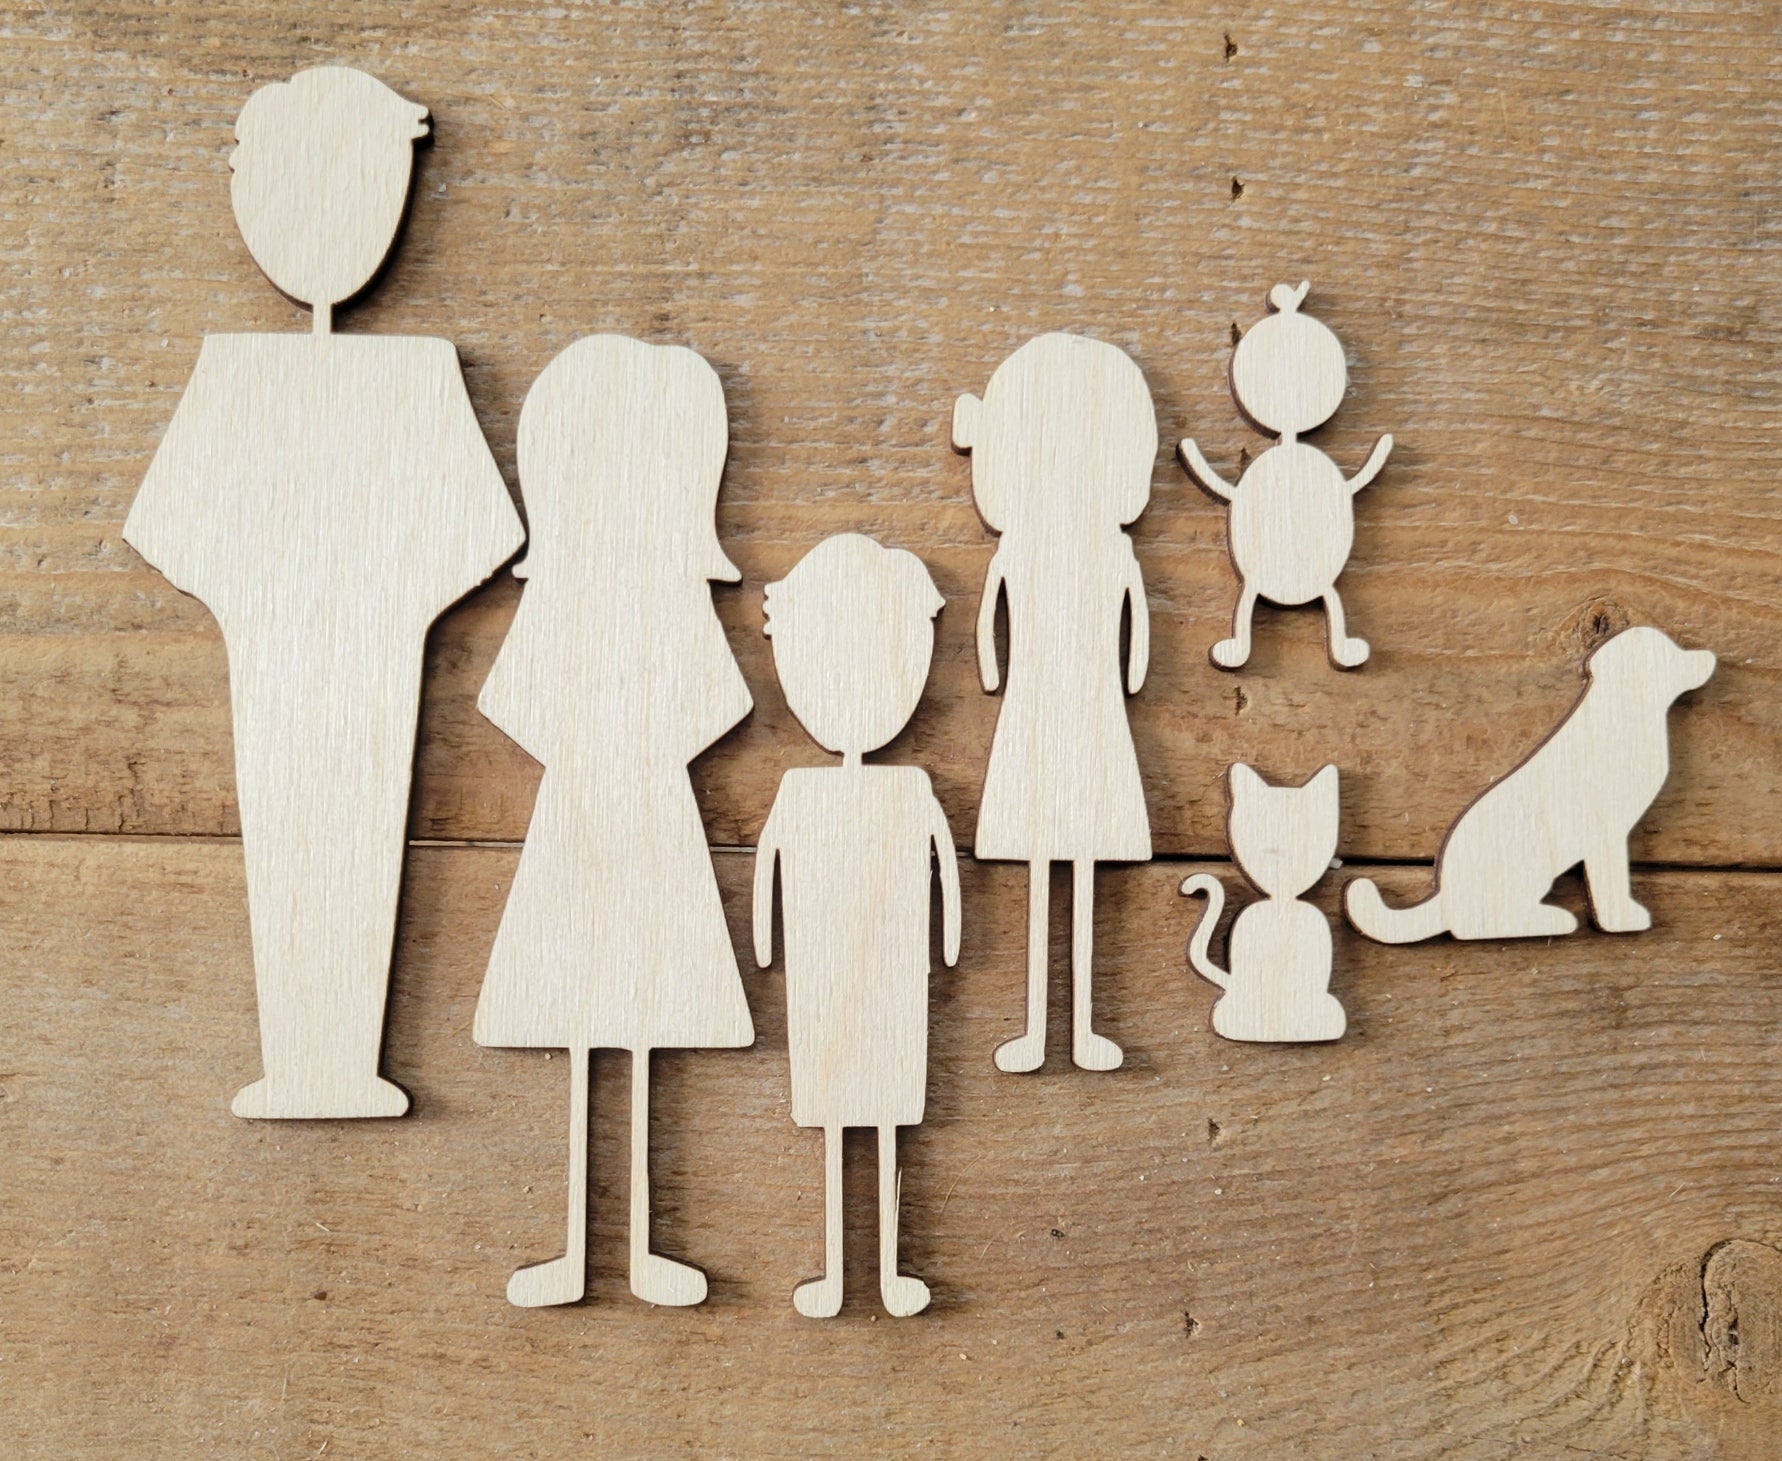 Together we make a family, stick figures, chalk couturem silk transfers Wood cut outs  Wood Blanks  Transfers  Stick Figure Family  Stick Figure  Cut outs  Chalk Couture